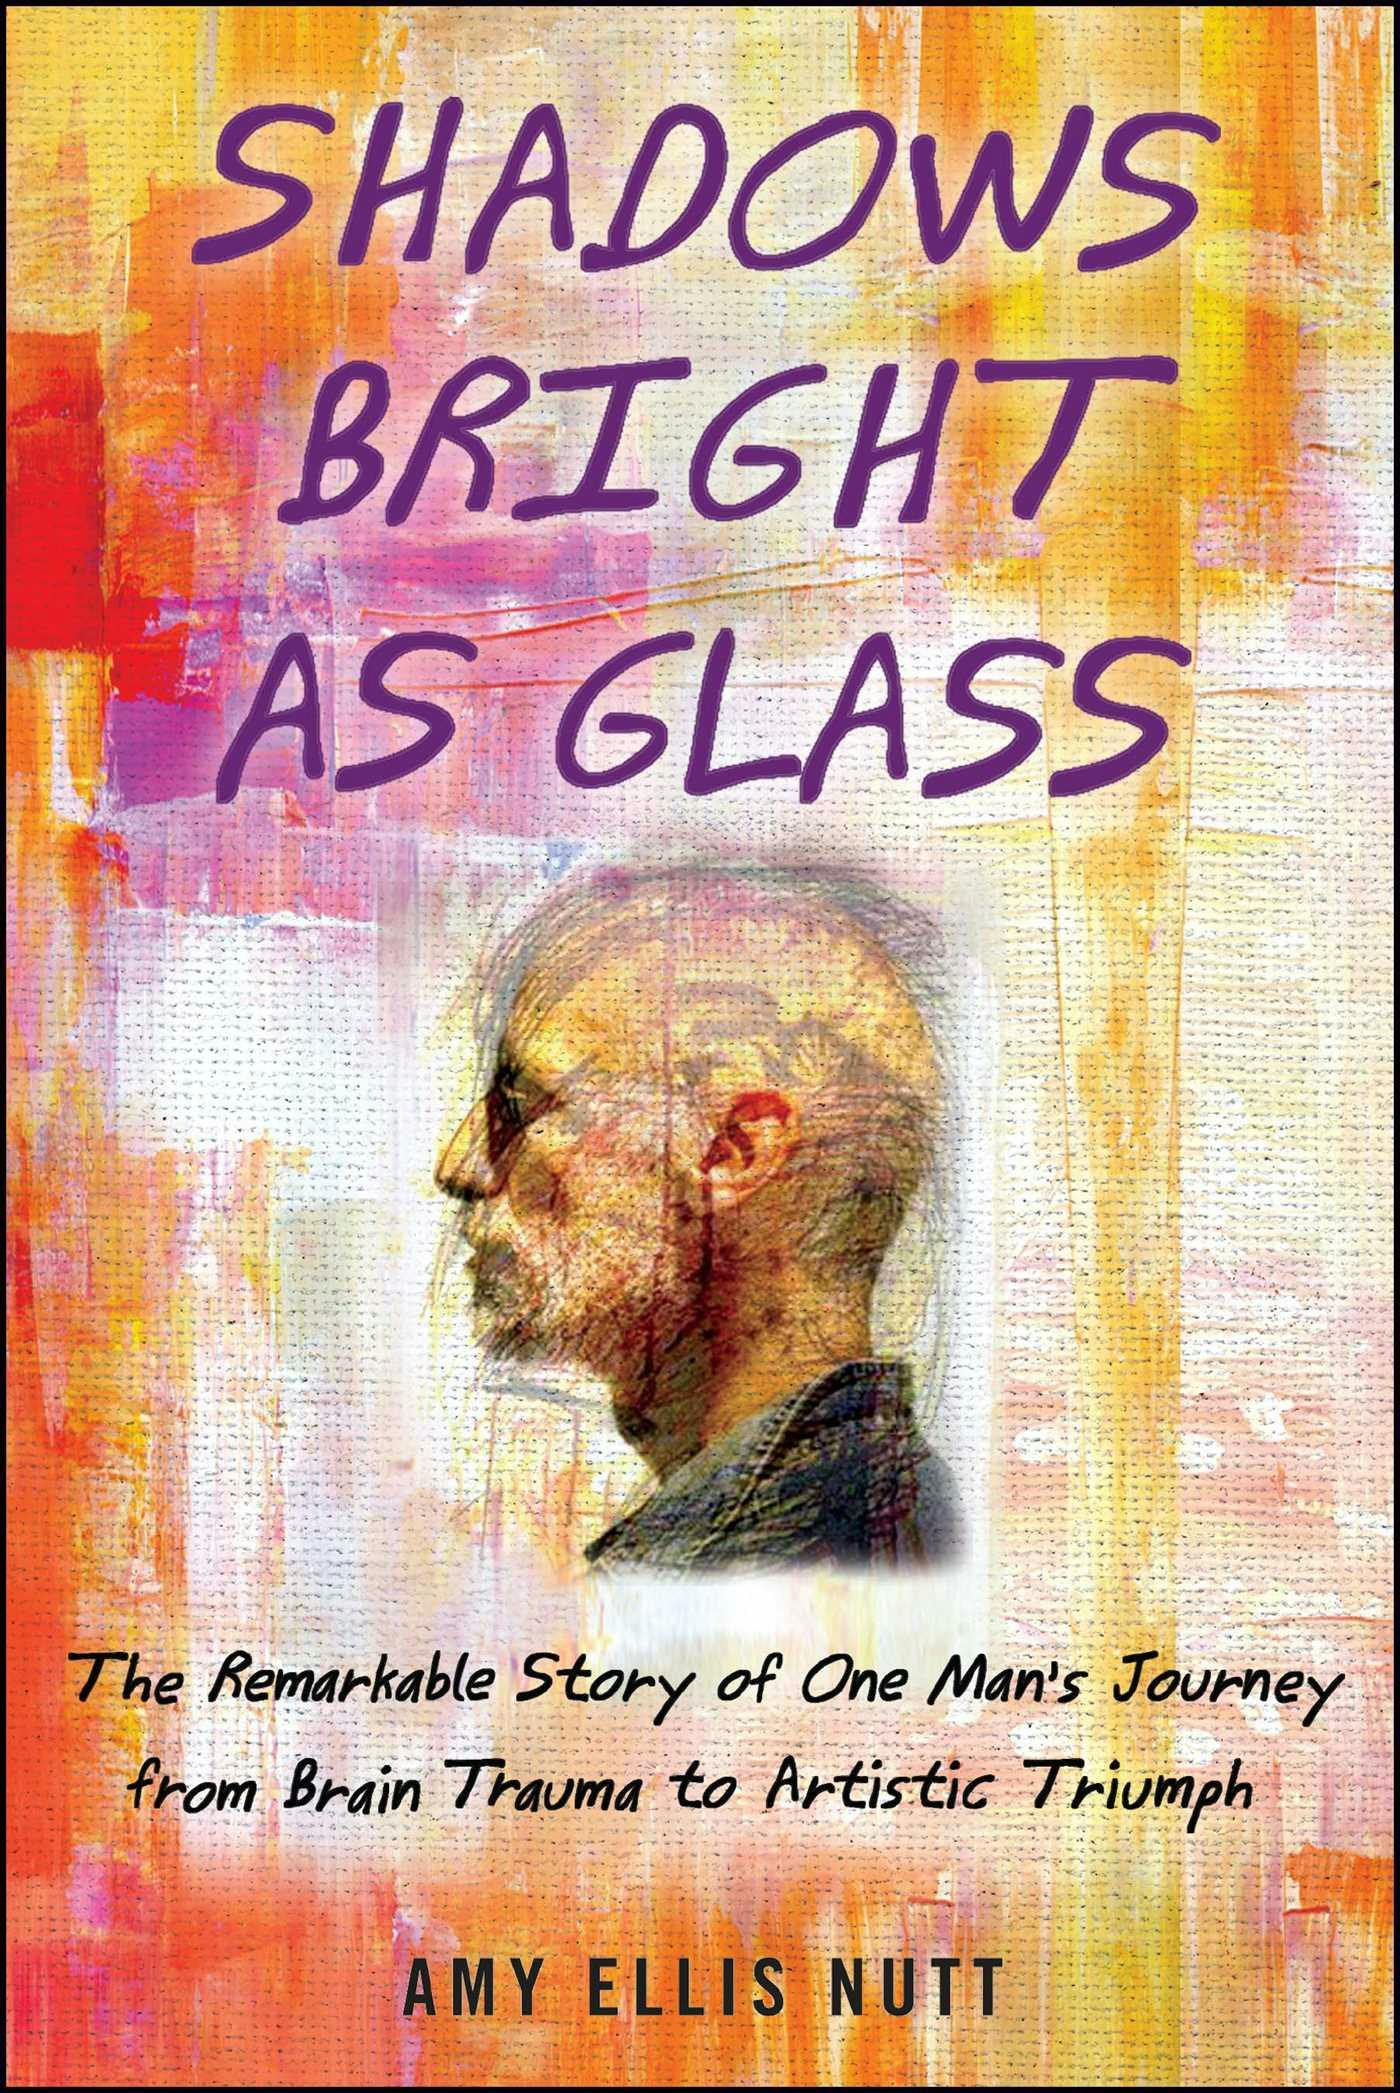 Shadows Bright as Glass: The Remarkable Story of One Man's Journey from Brain Trauma to Artistic Triumph - Amy Ellis Nutt